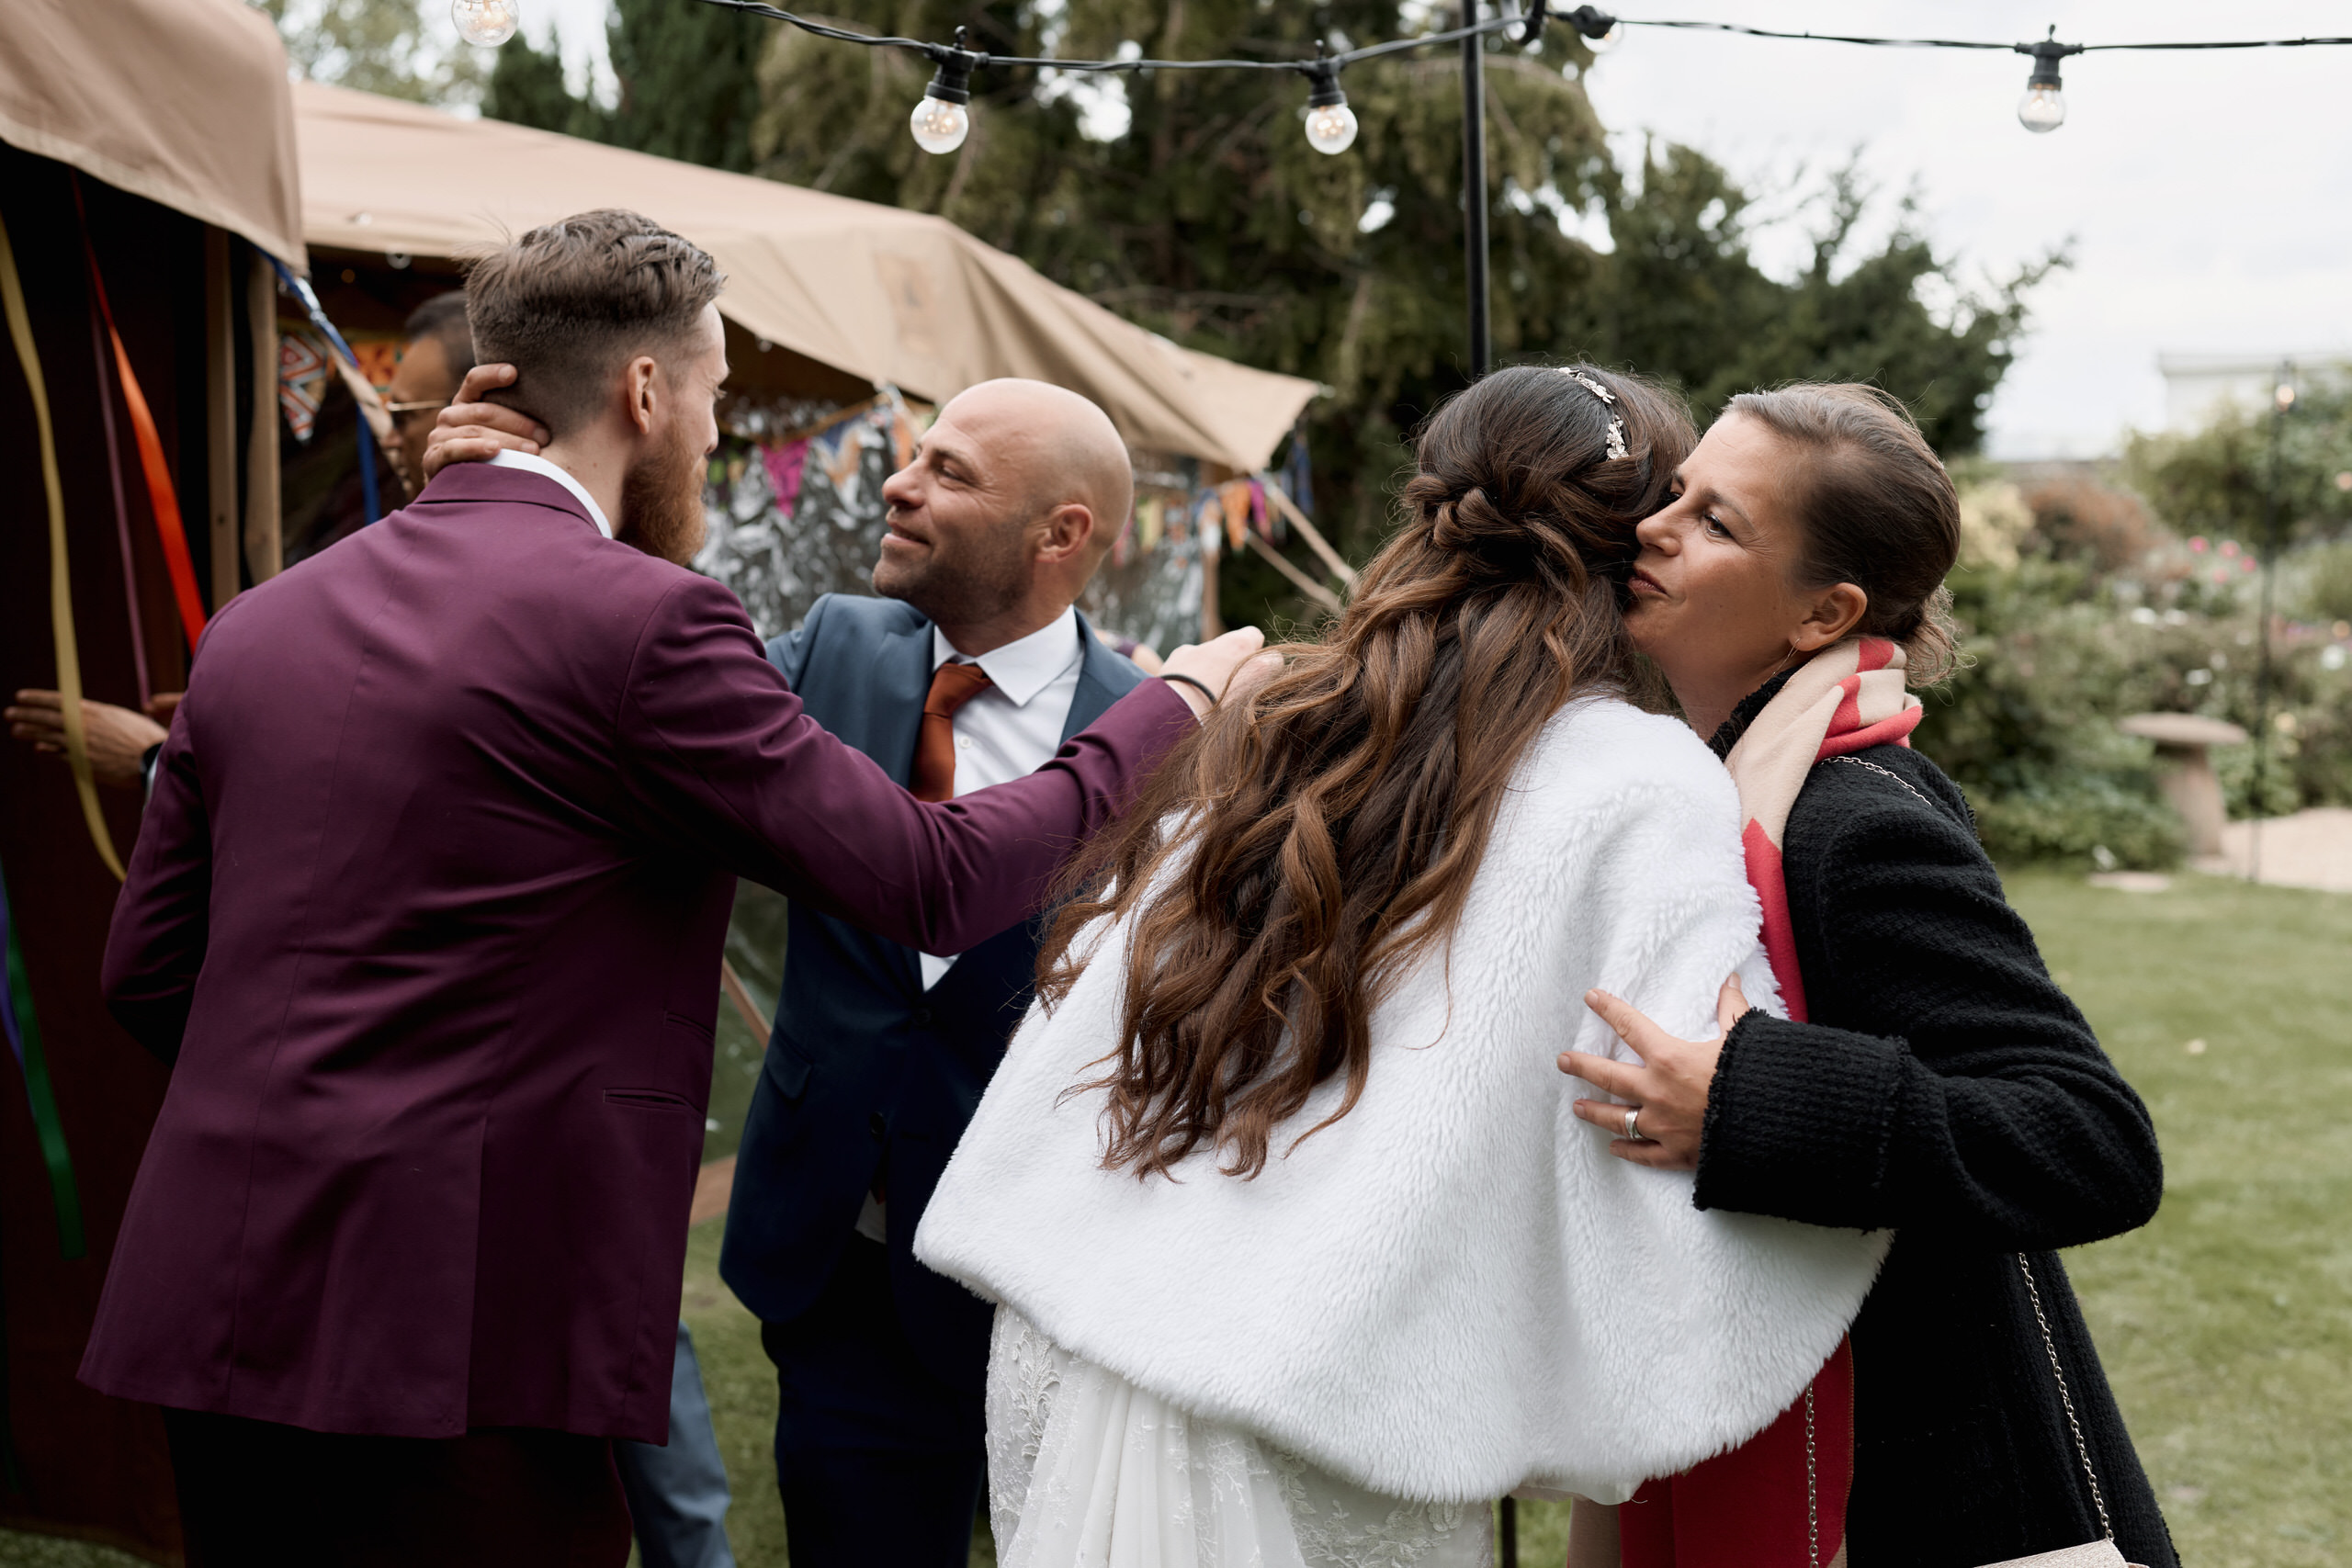 A couple getting married are hugging in front of a tent.